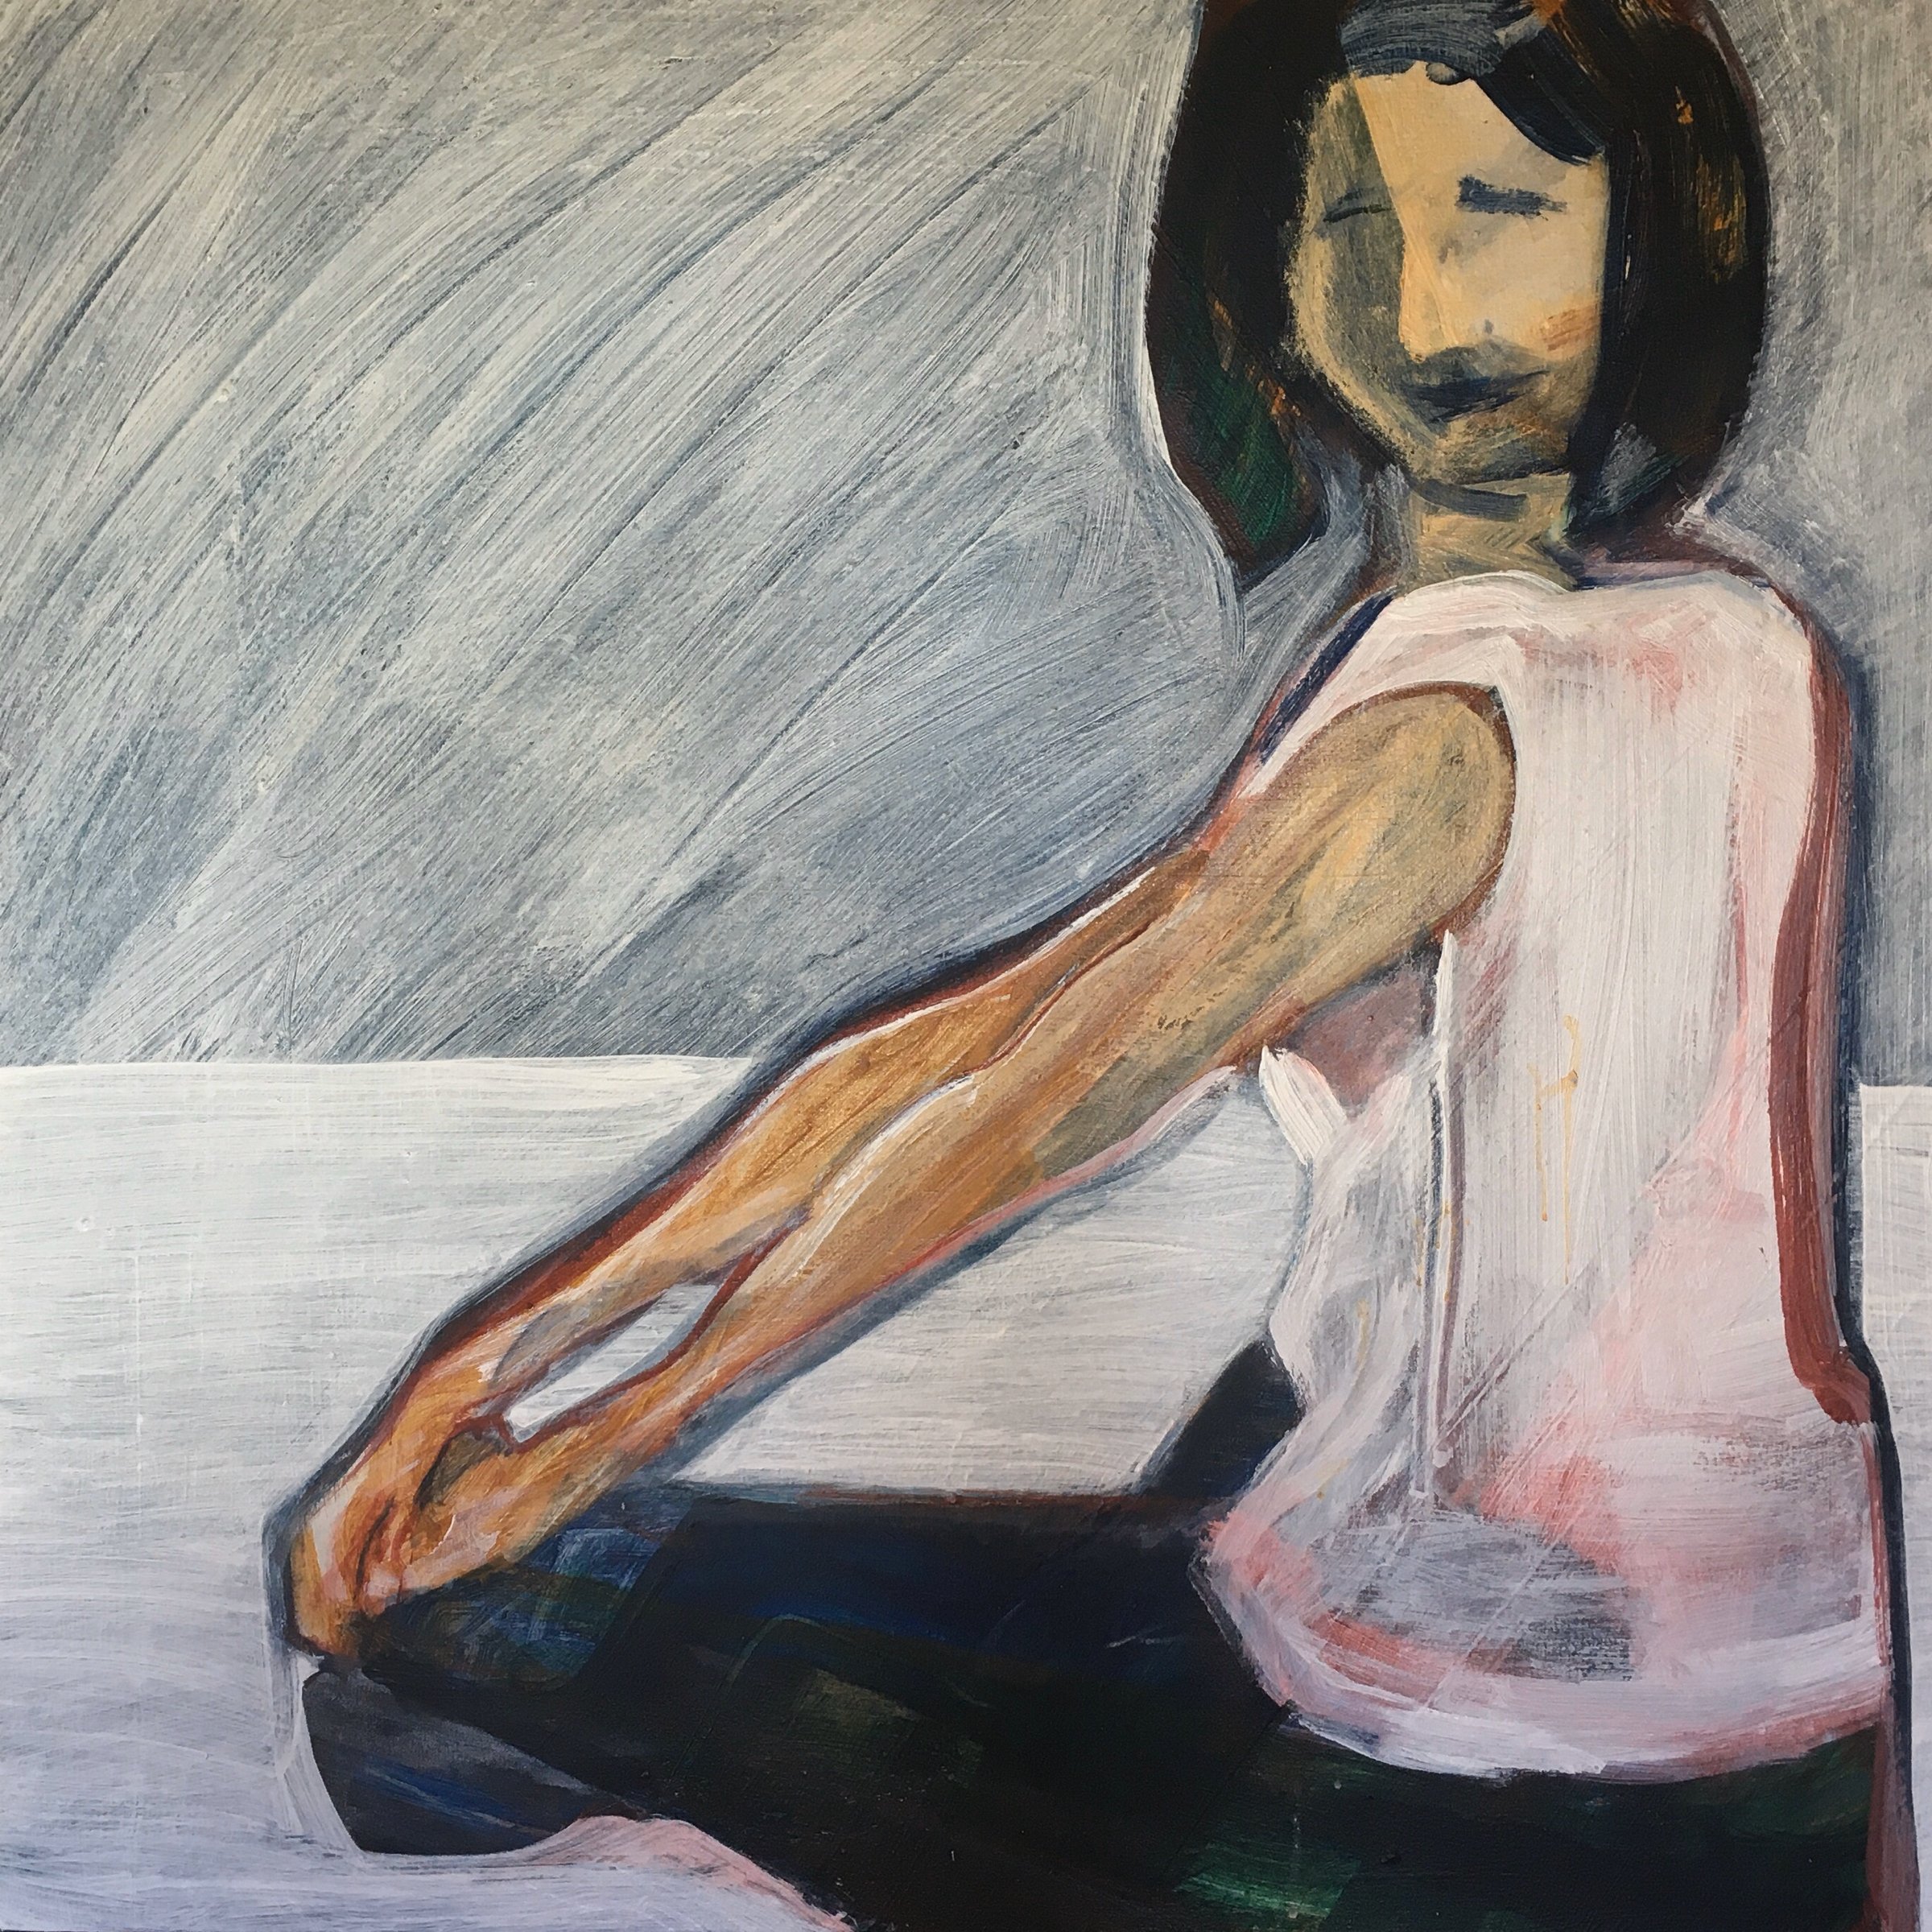 Seated Woman 8, 2020